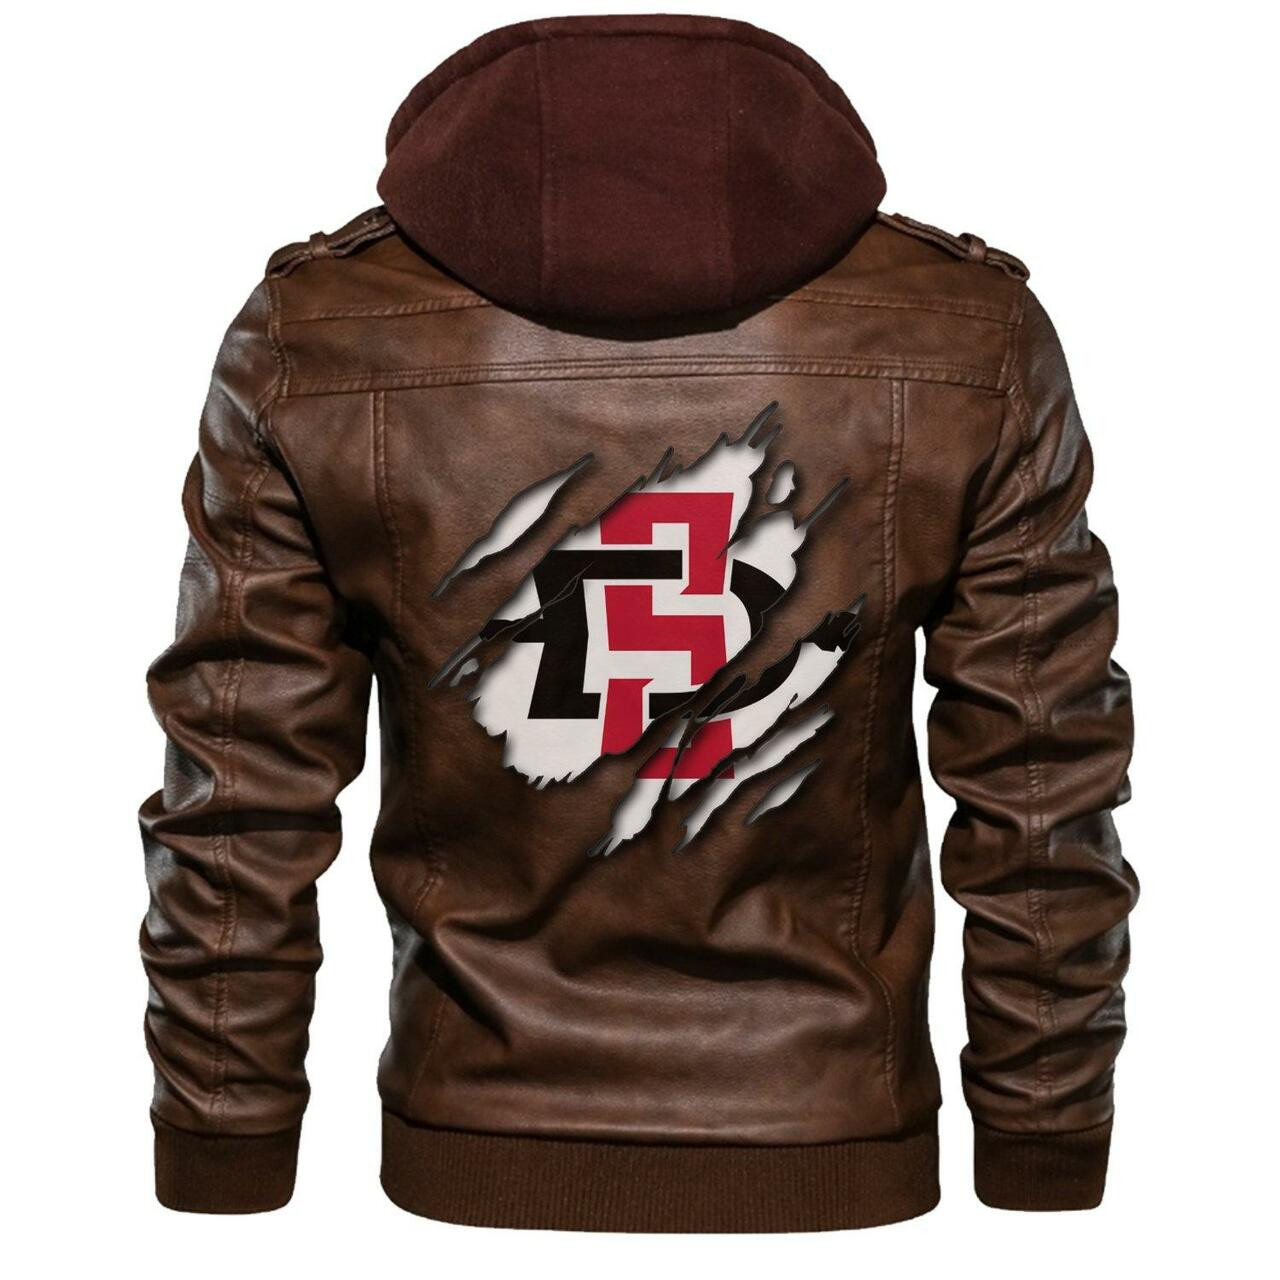 Our store has all of the latest leather jacket 42